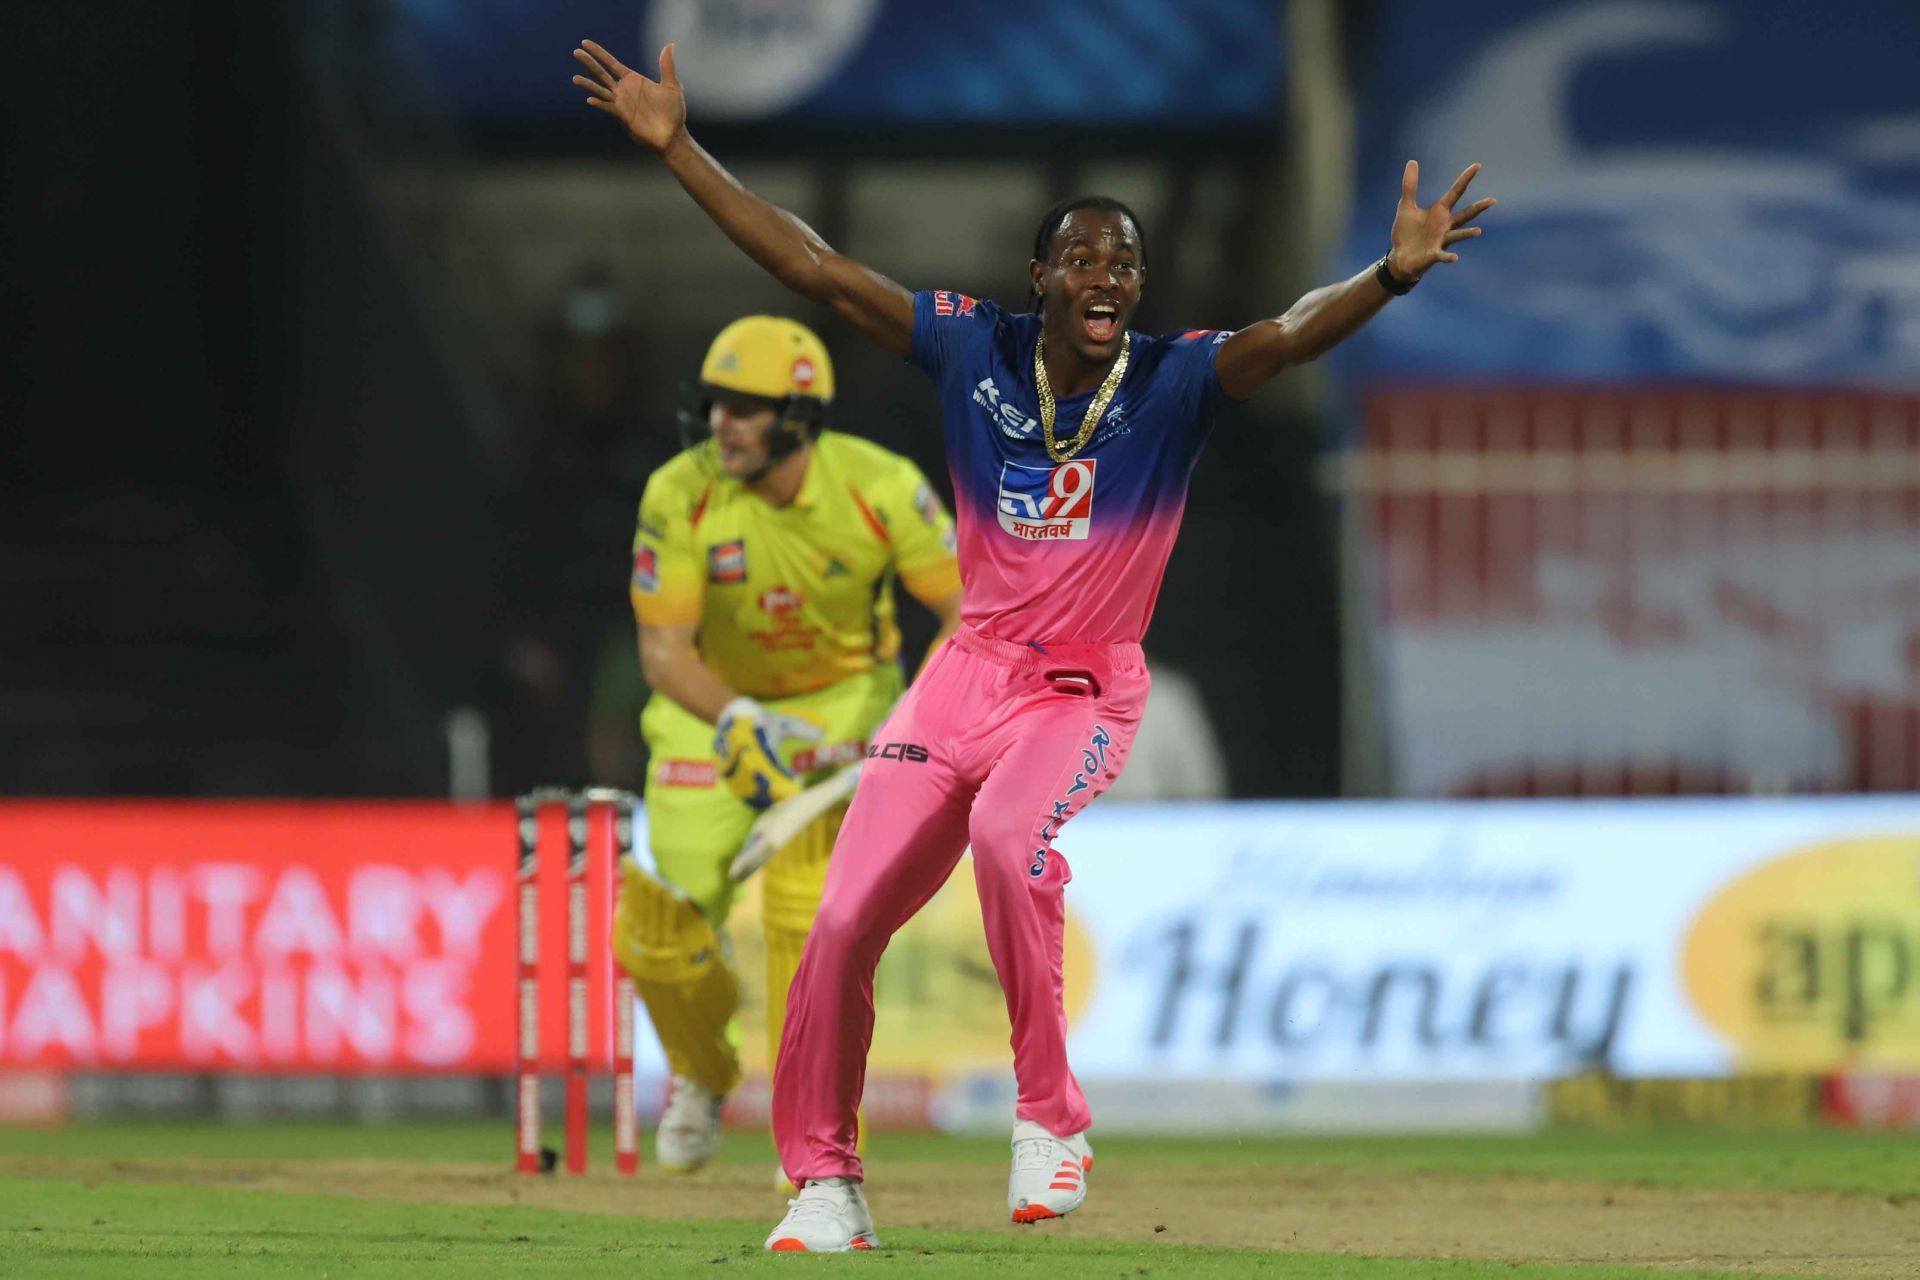 Jofra Archer did not play a single match in IPL 2021 because of injury (Image Courtesy: IPLT20.com)